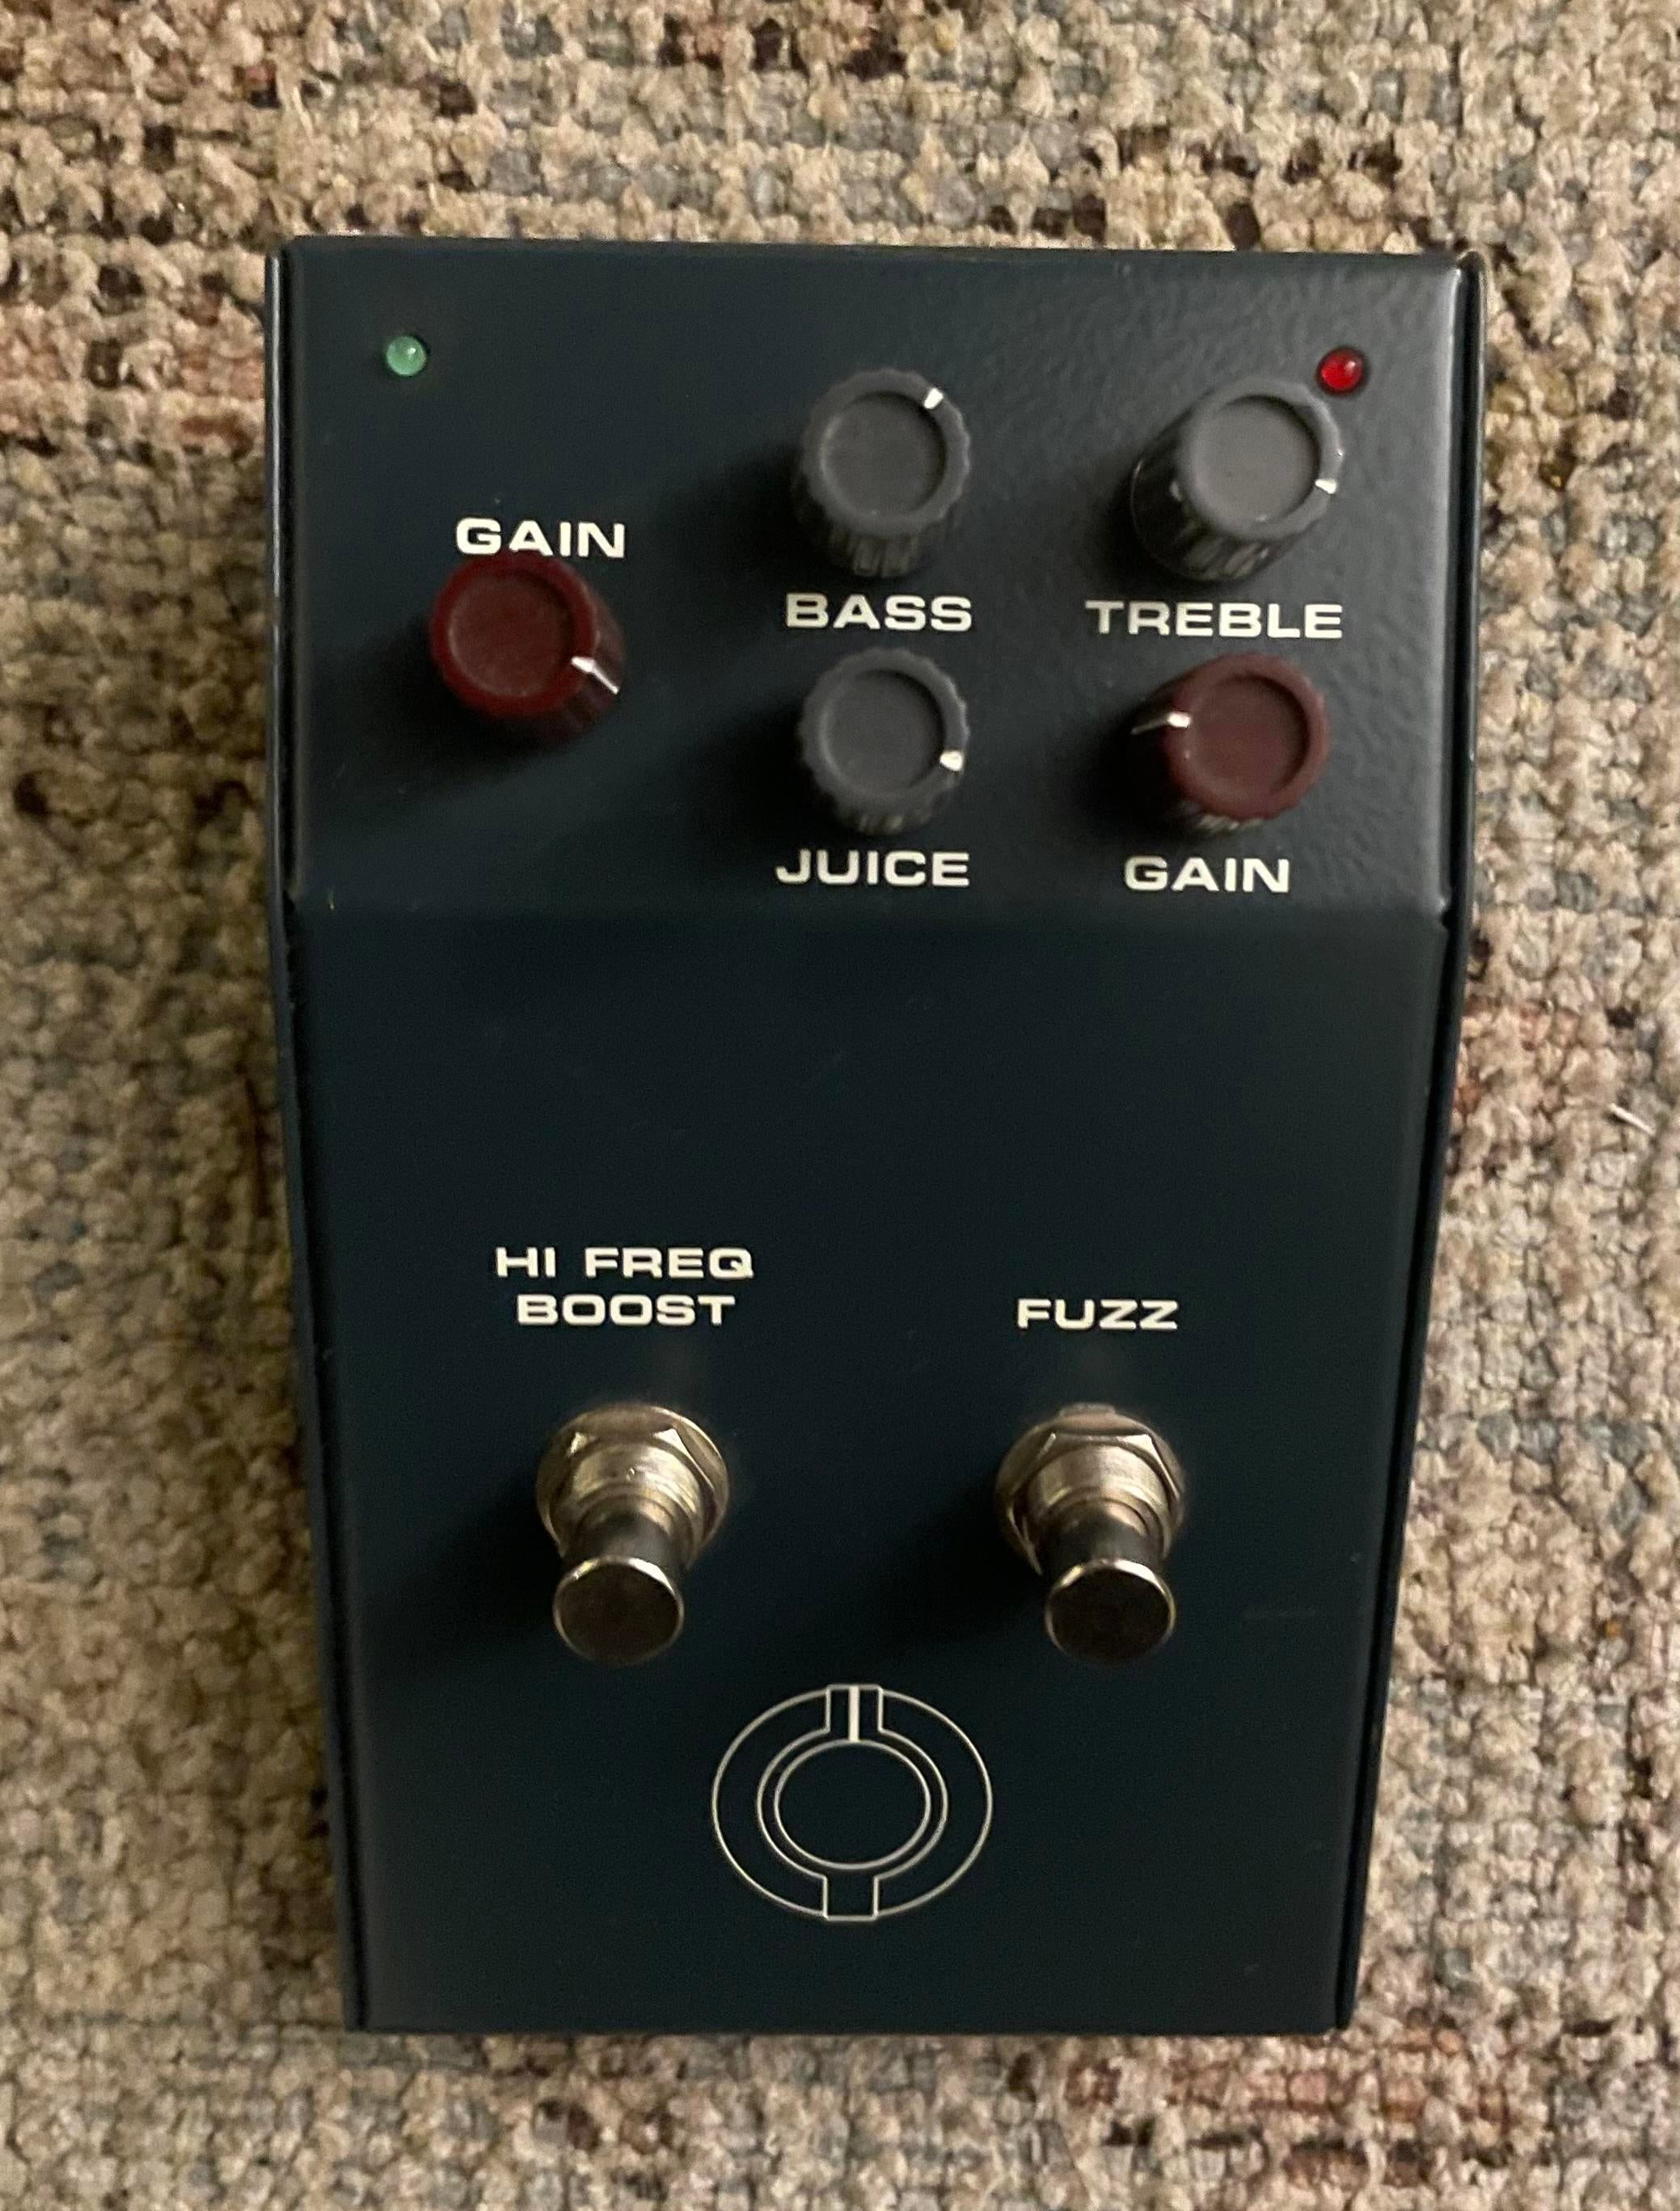 Used BAE Hot Fuzz Hybrid Fuzz and Treble - Sweetwater's Gear Exchange